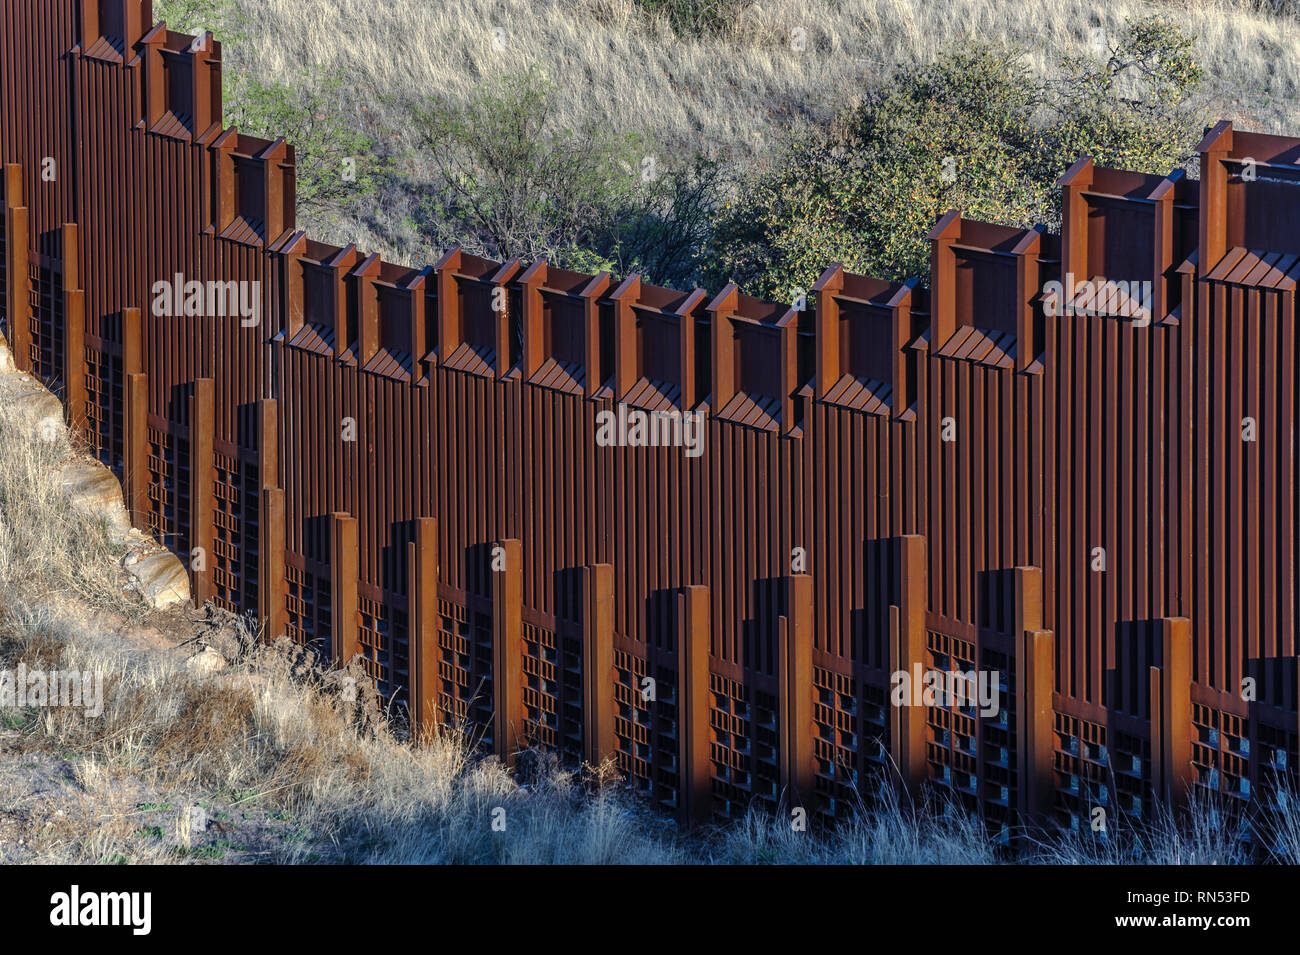 US border fence on Mexico boundary, bollard style pedestrian barrier, specialized for water flow, US side, east of Nogales Arizona, April 2018 Stock Photo